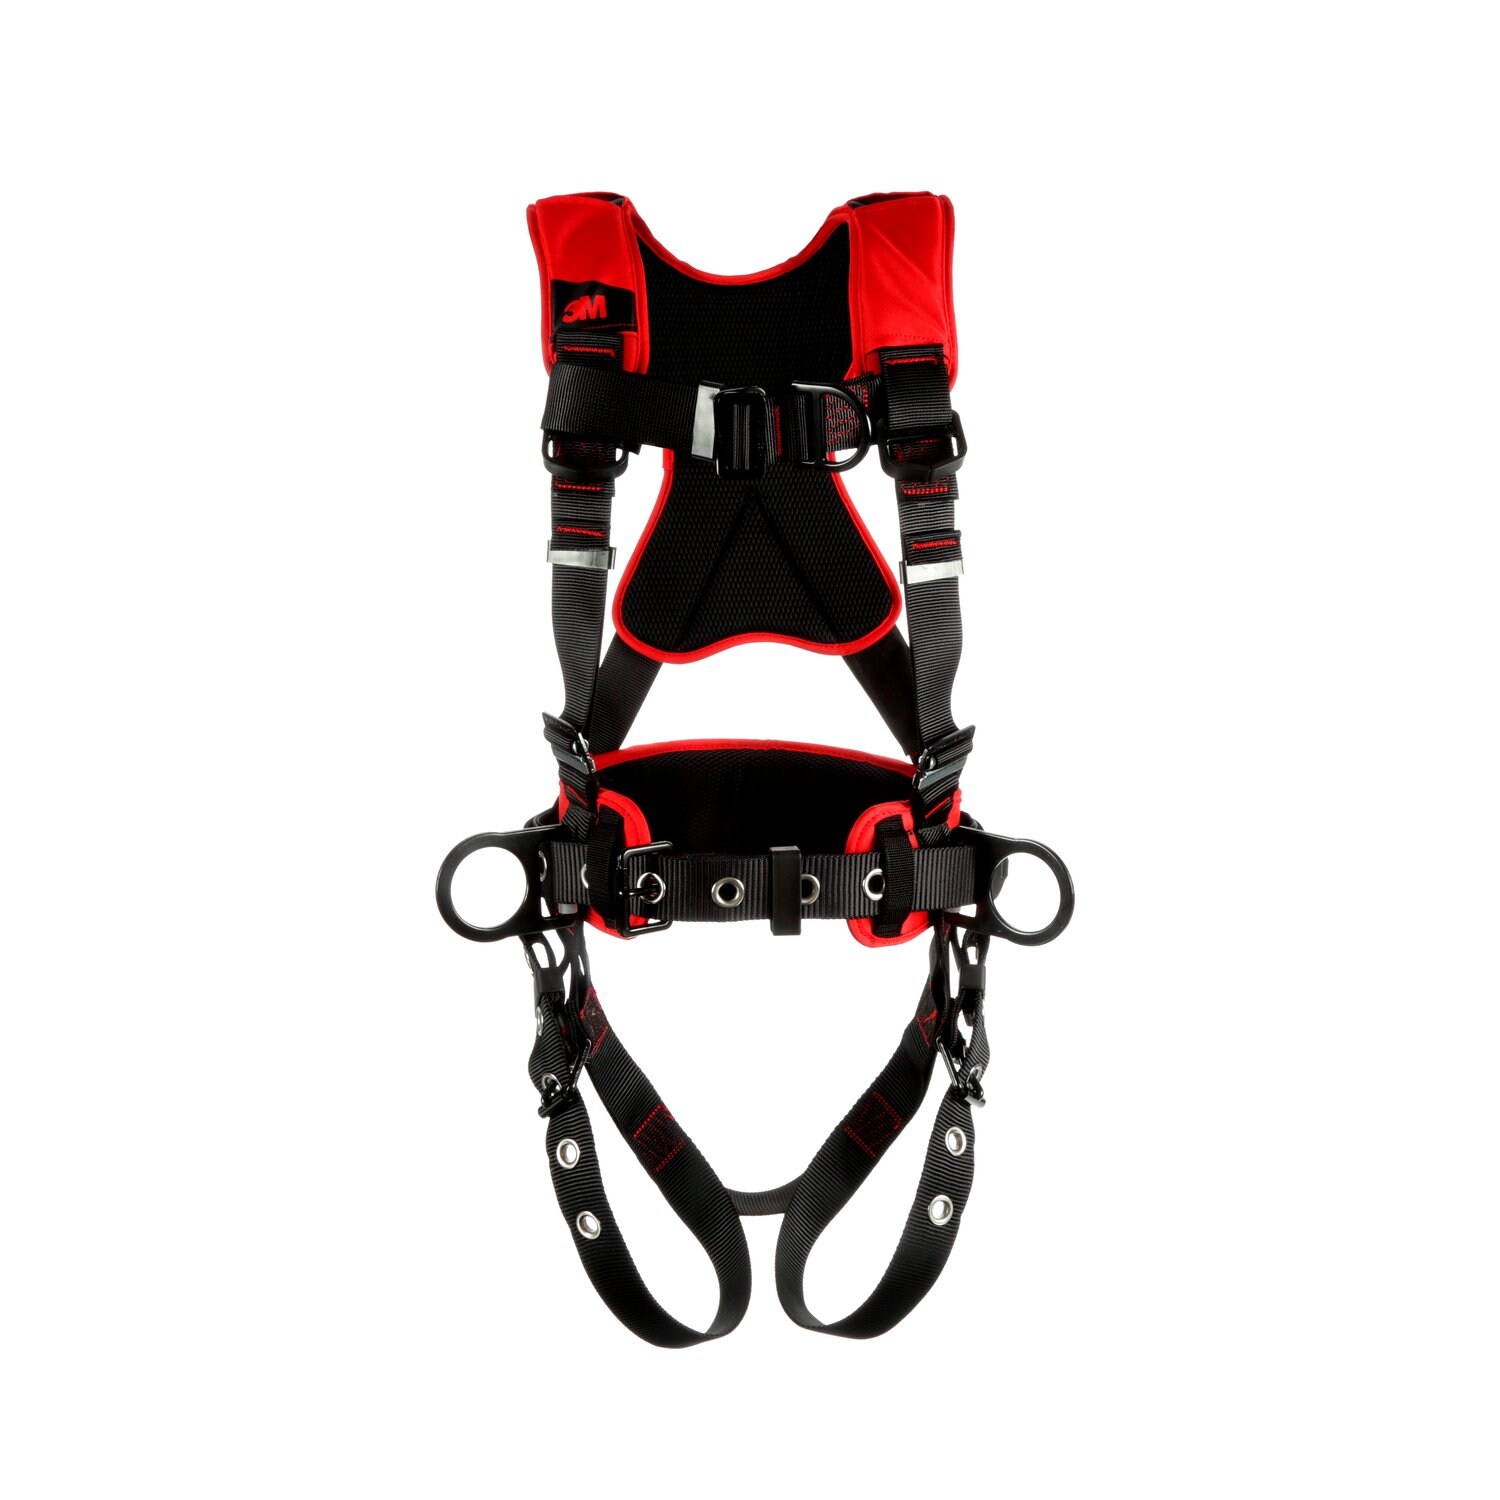 7012816627 - 3M Protecta P200 Comfort Construction Climbing/Positioning Safety Harness 1161226, Small